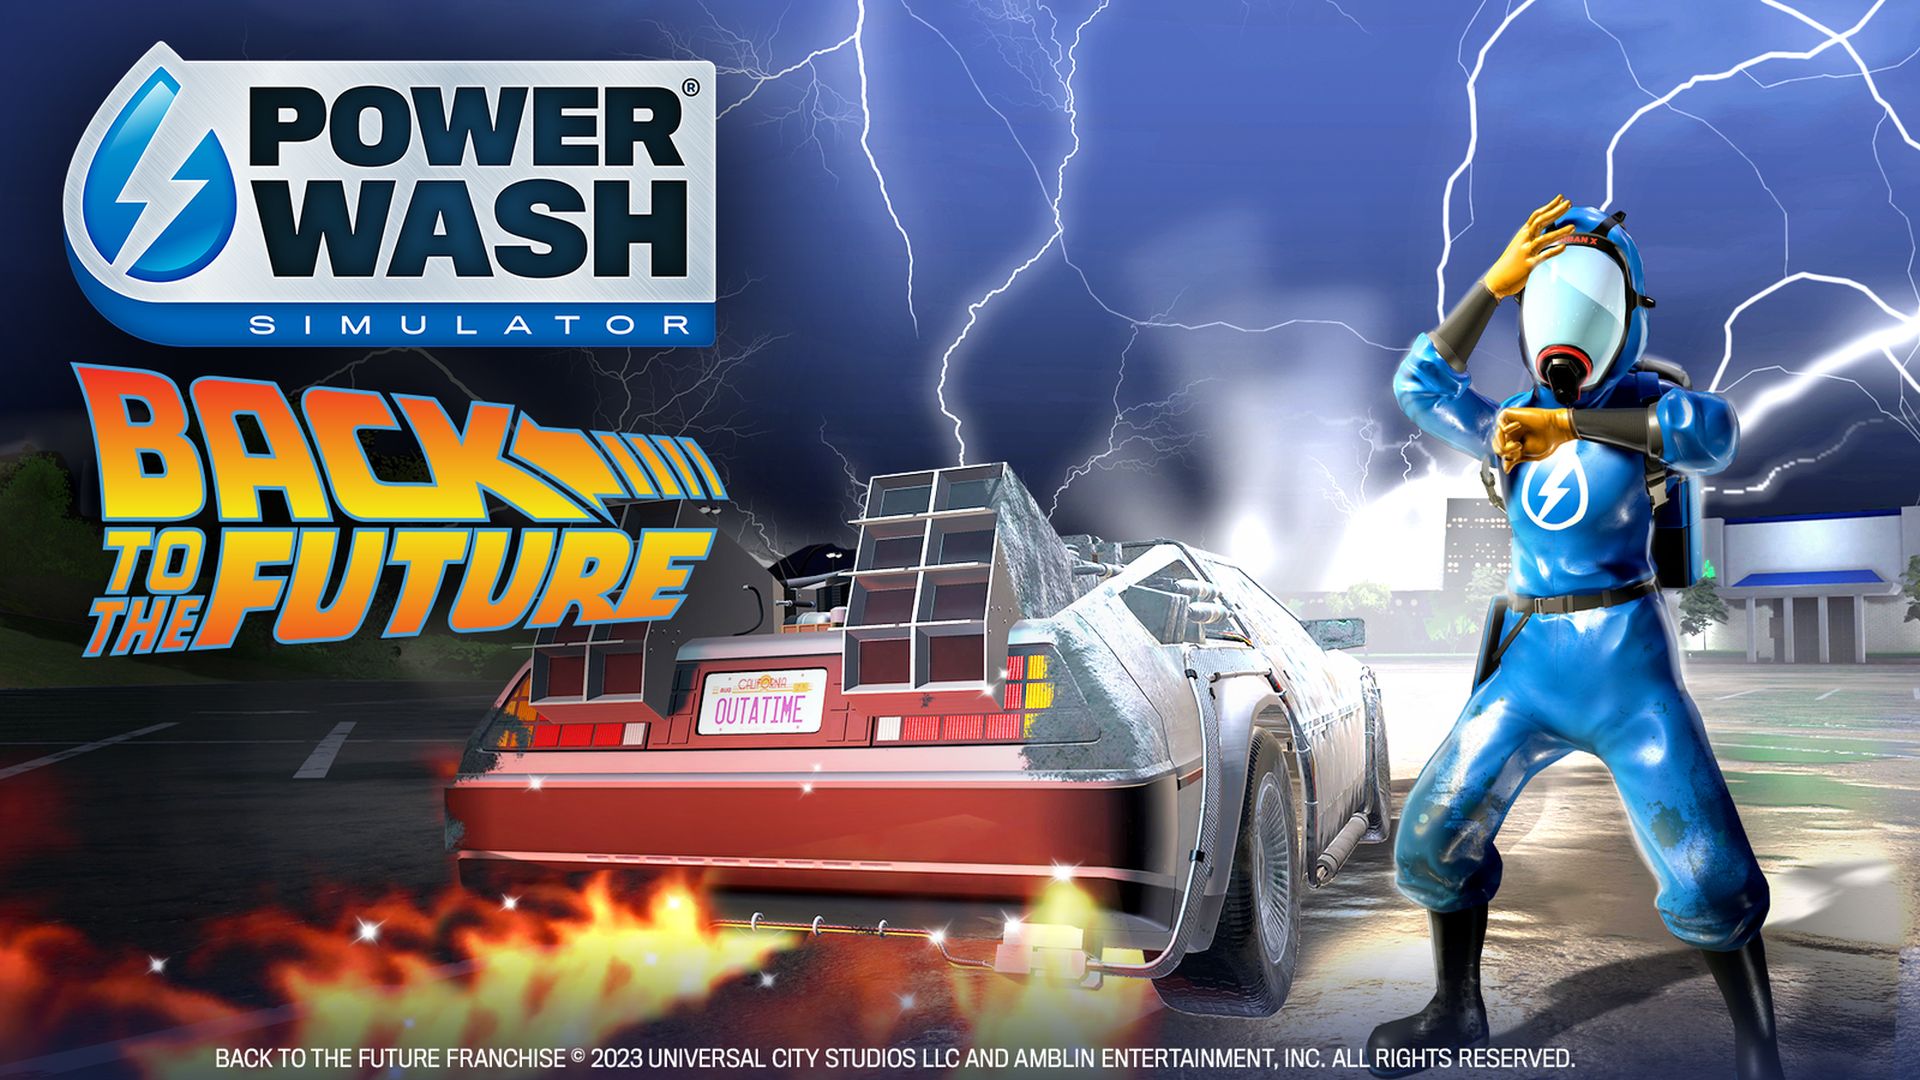 PowerWash Simulator is Going Back to the Future With New DLC Later This Year